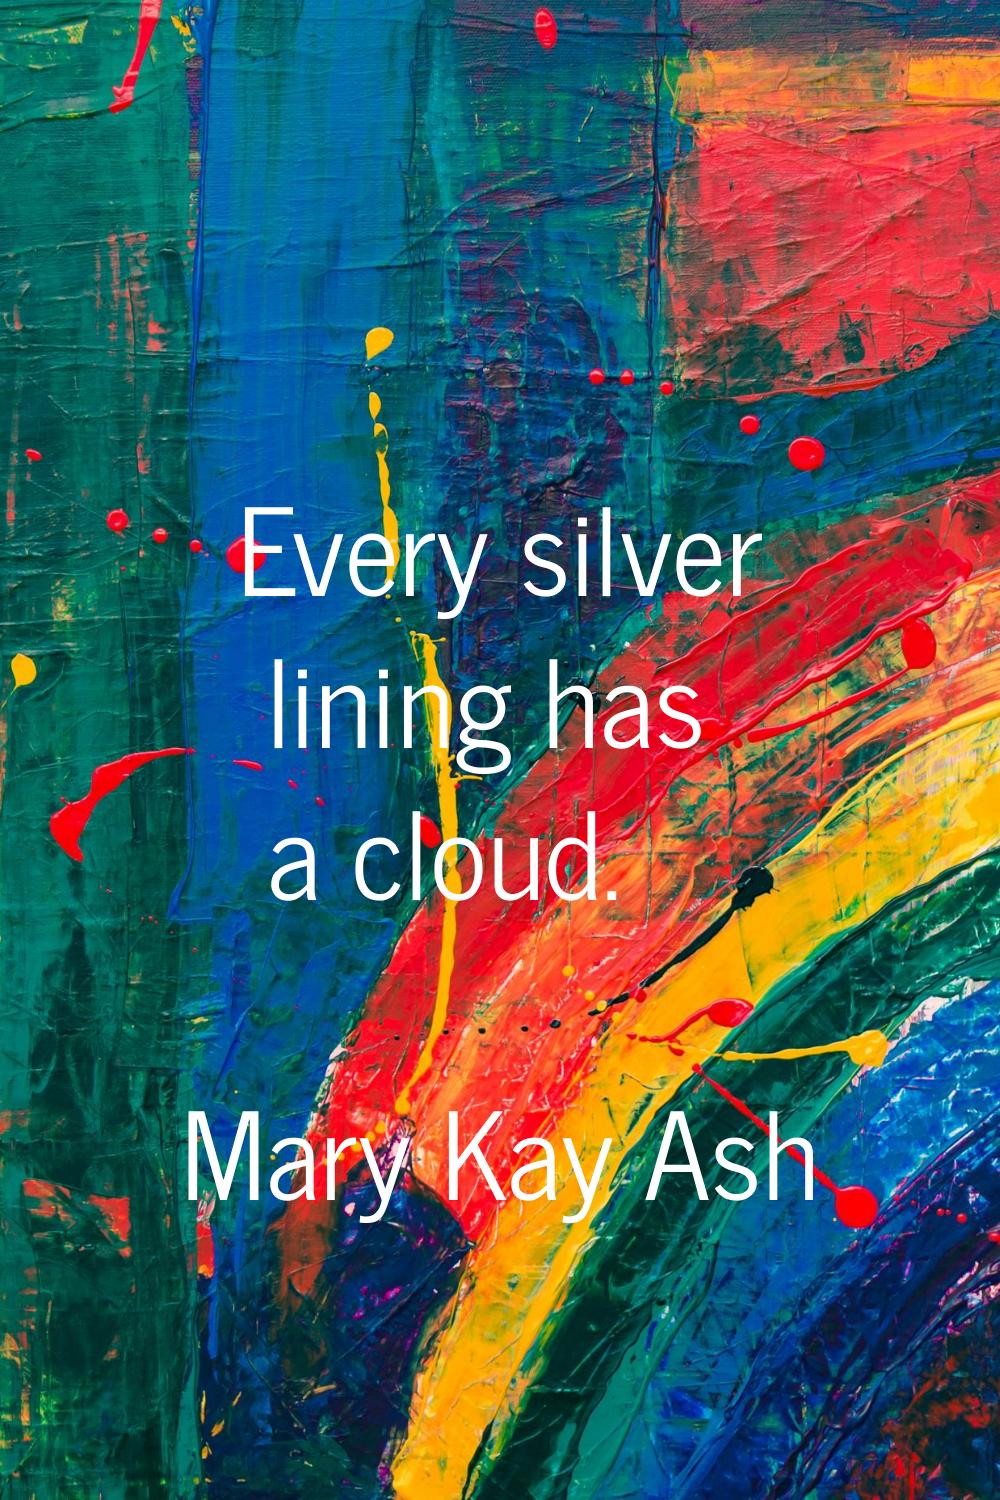 Every silver lining has a cloud.